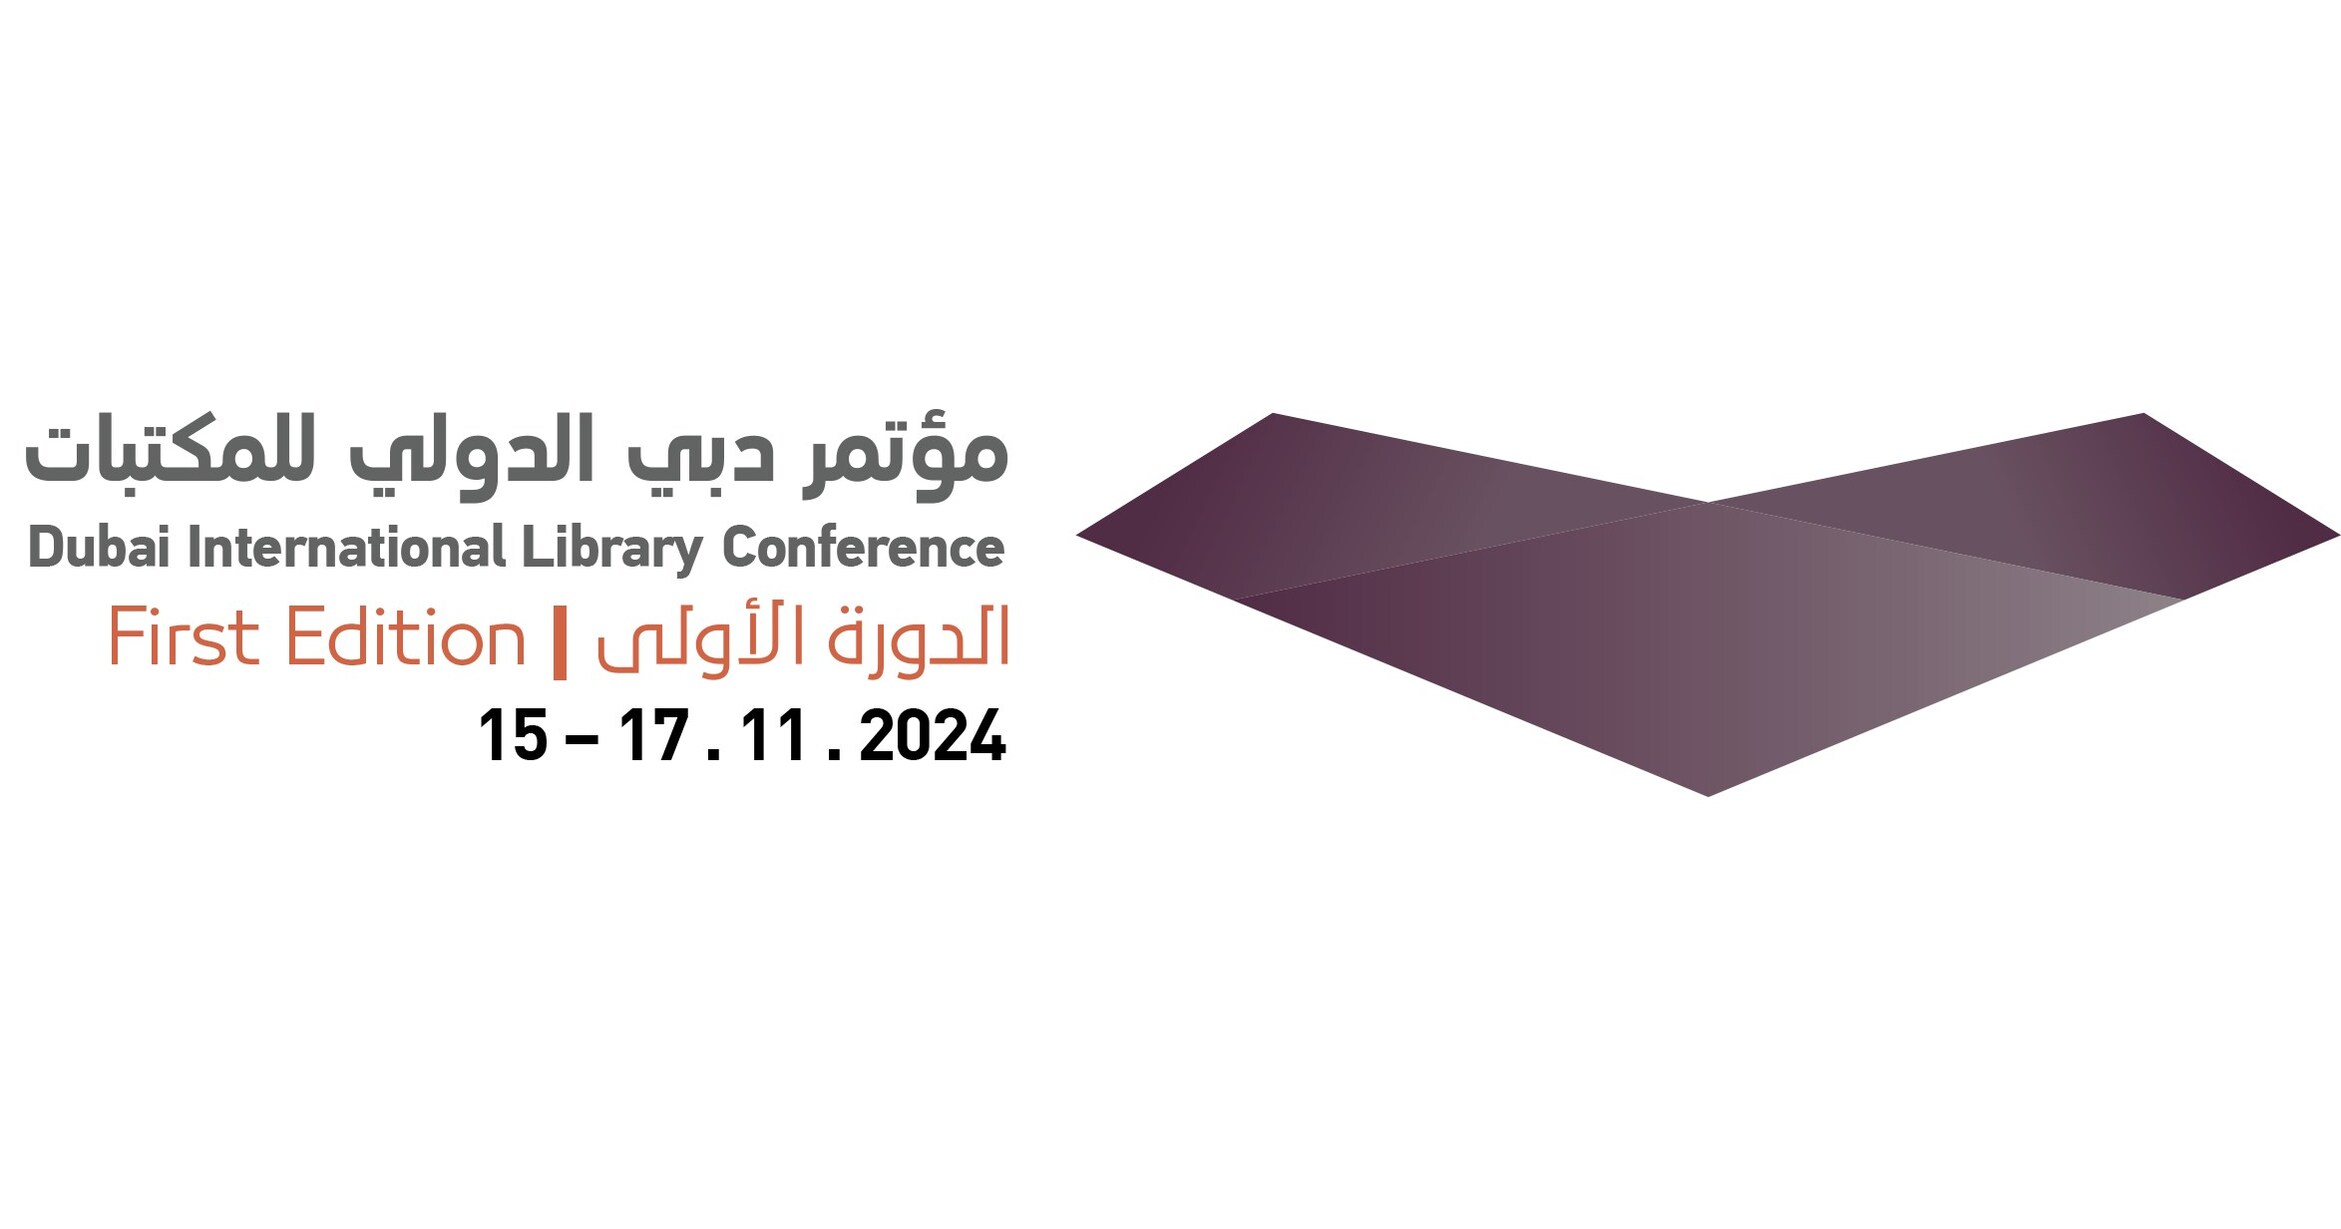 Mohammed Bin Rashid Library Calls All Libraries Experts to Join the First Dubai International Library Conference 2024 From 15-17 November 2024